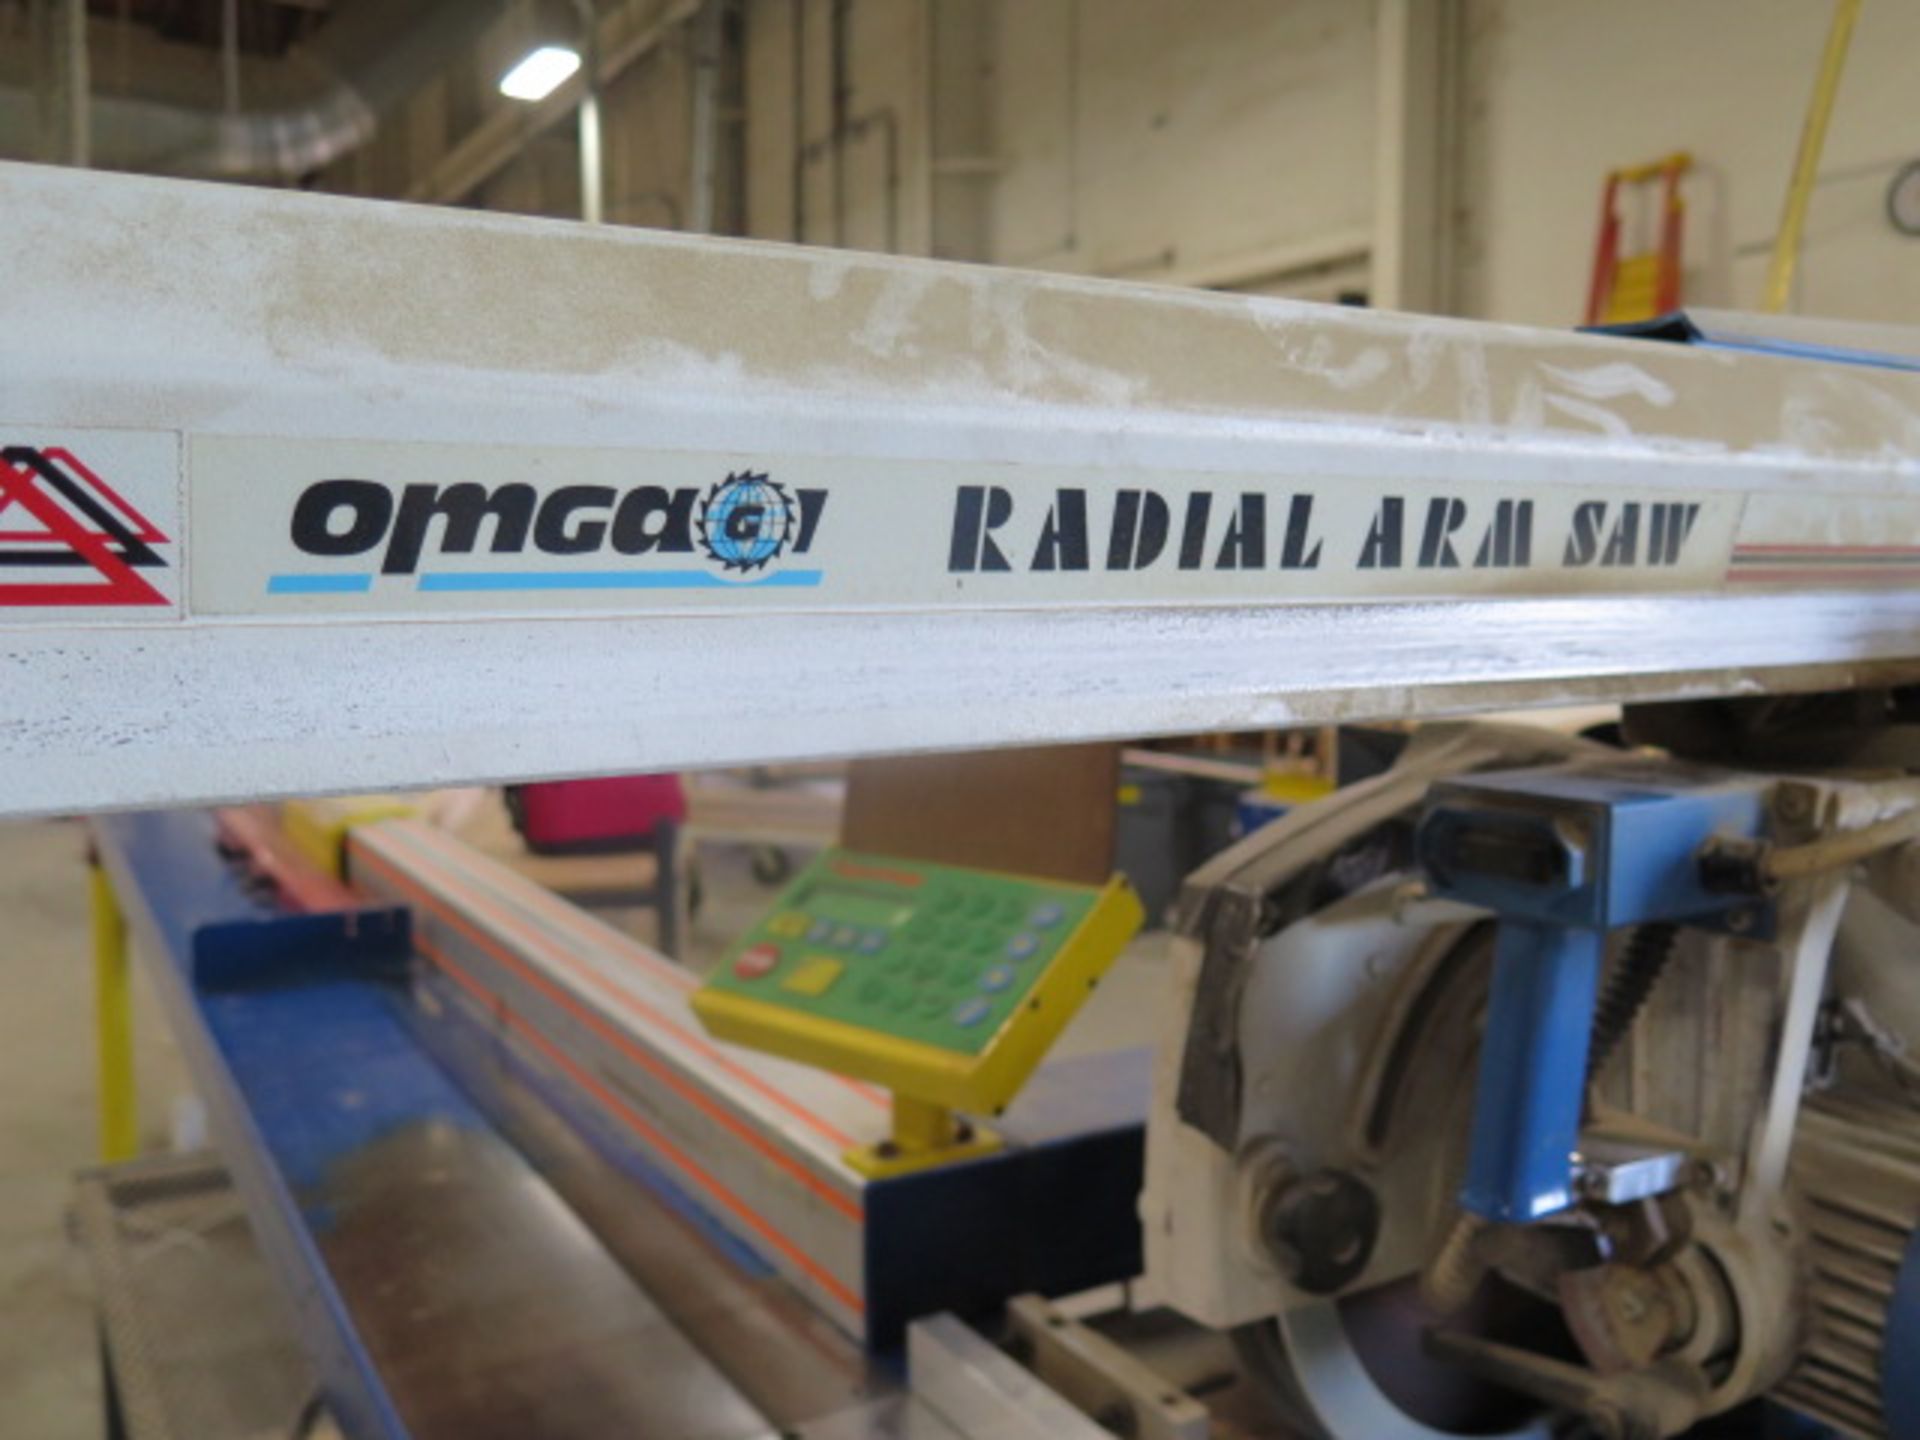 2005 Omga RN-600FM”US” 14” Radial Arm Saw s/n01-299055 w/TigerStop 10’ Programmable Stop, SOLD AS IS - Image 8 of 12